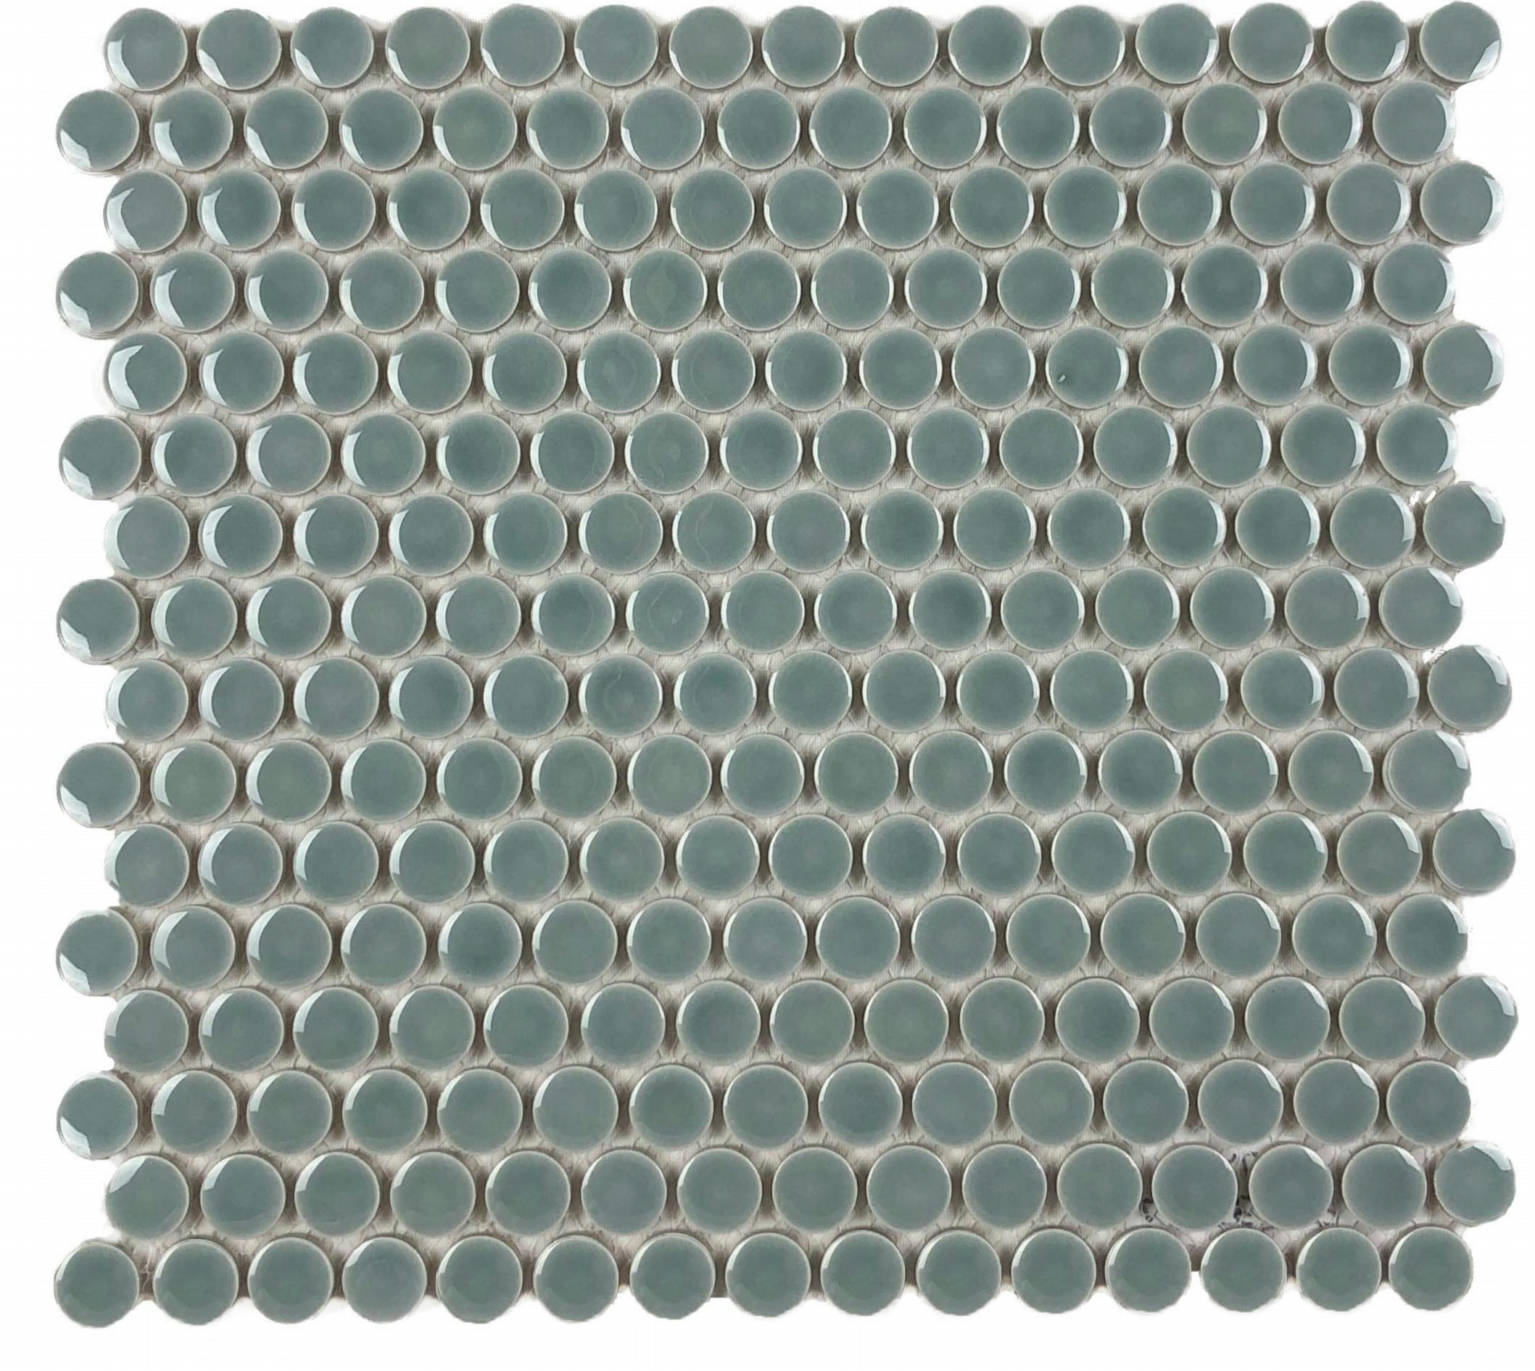 Mosaic Teal 1-Inch Penny Rounds Pattern (12"x12")